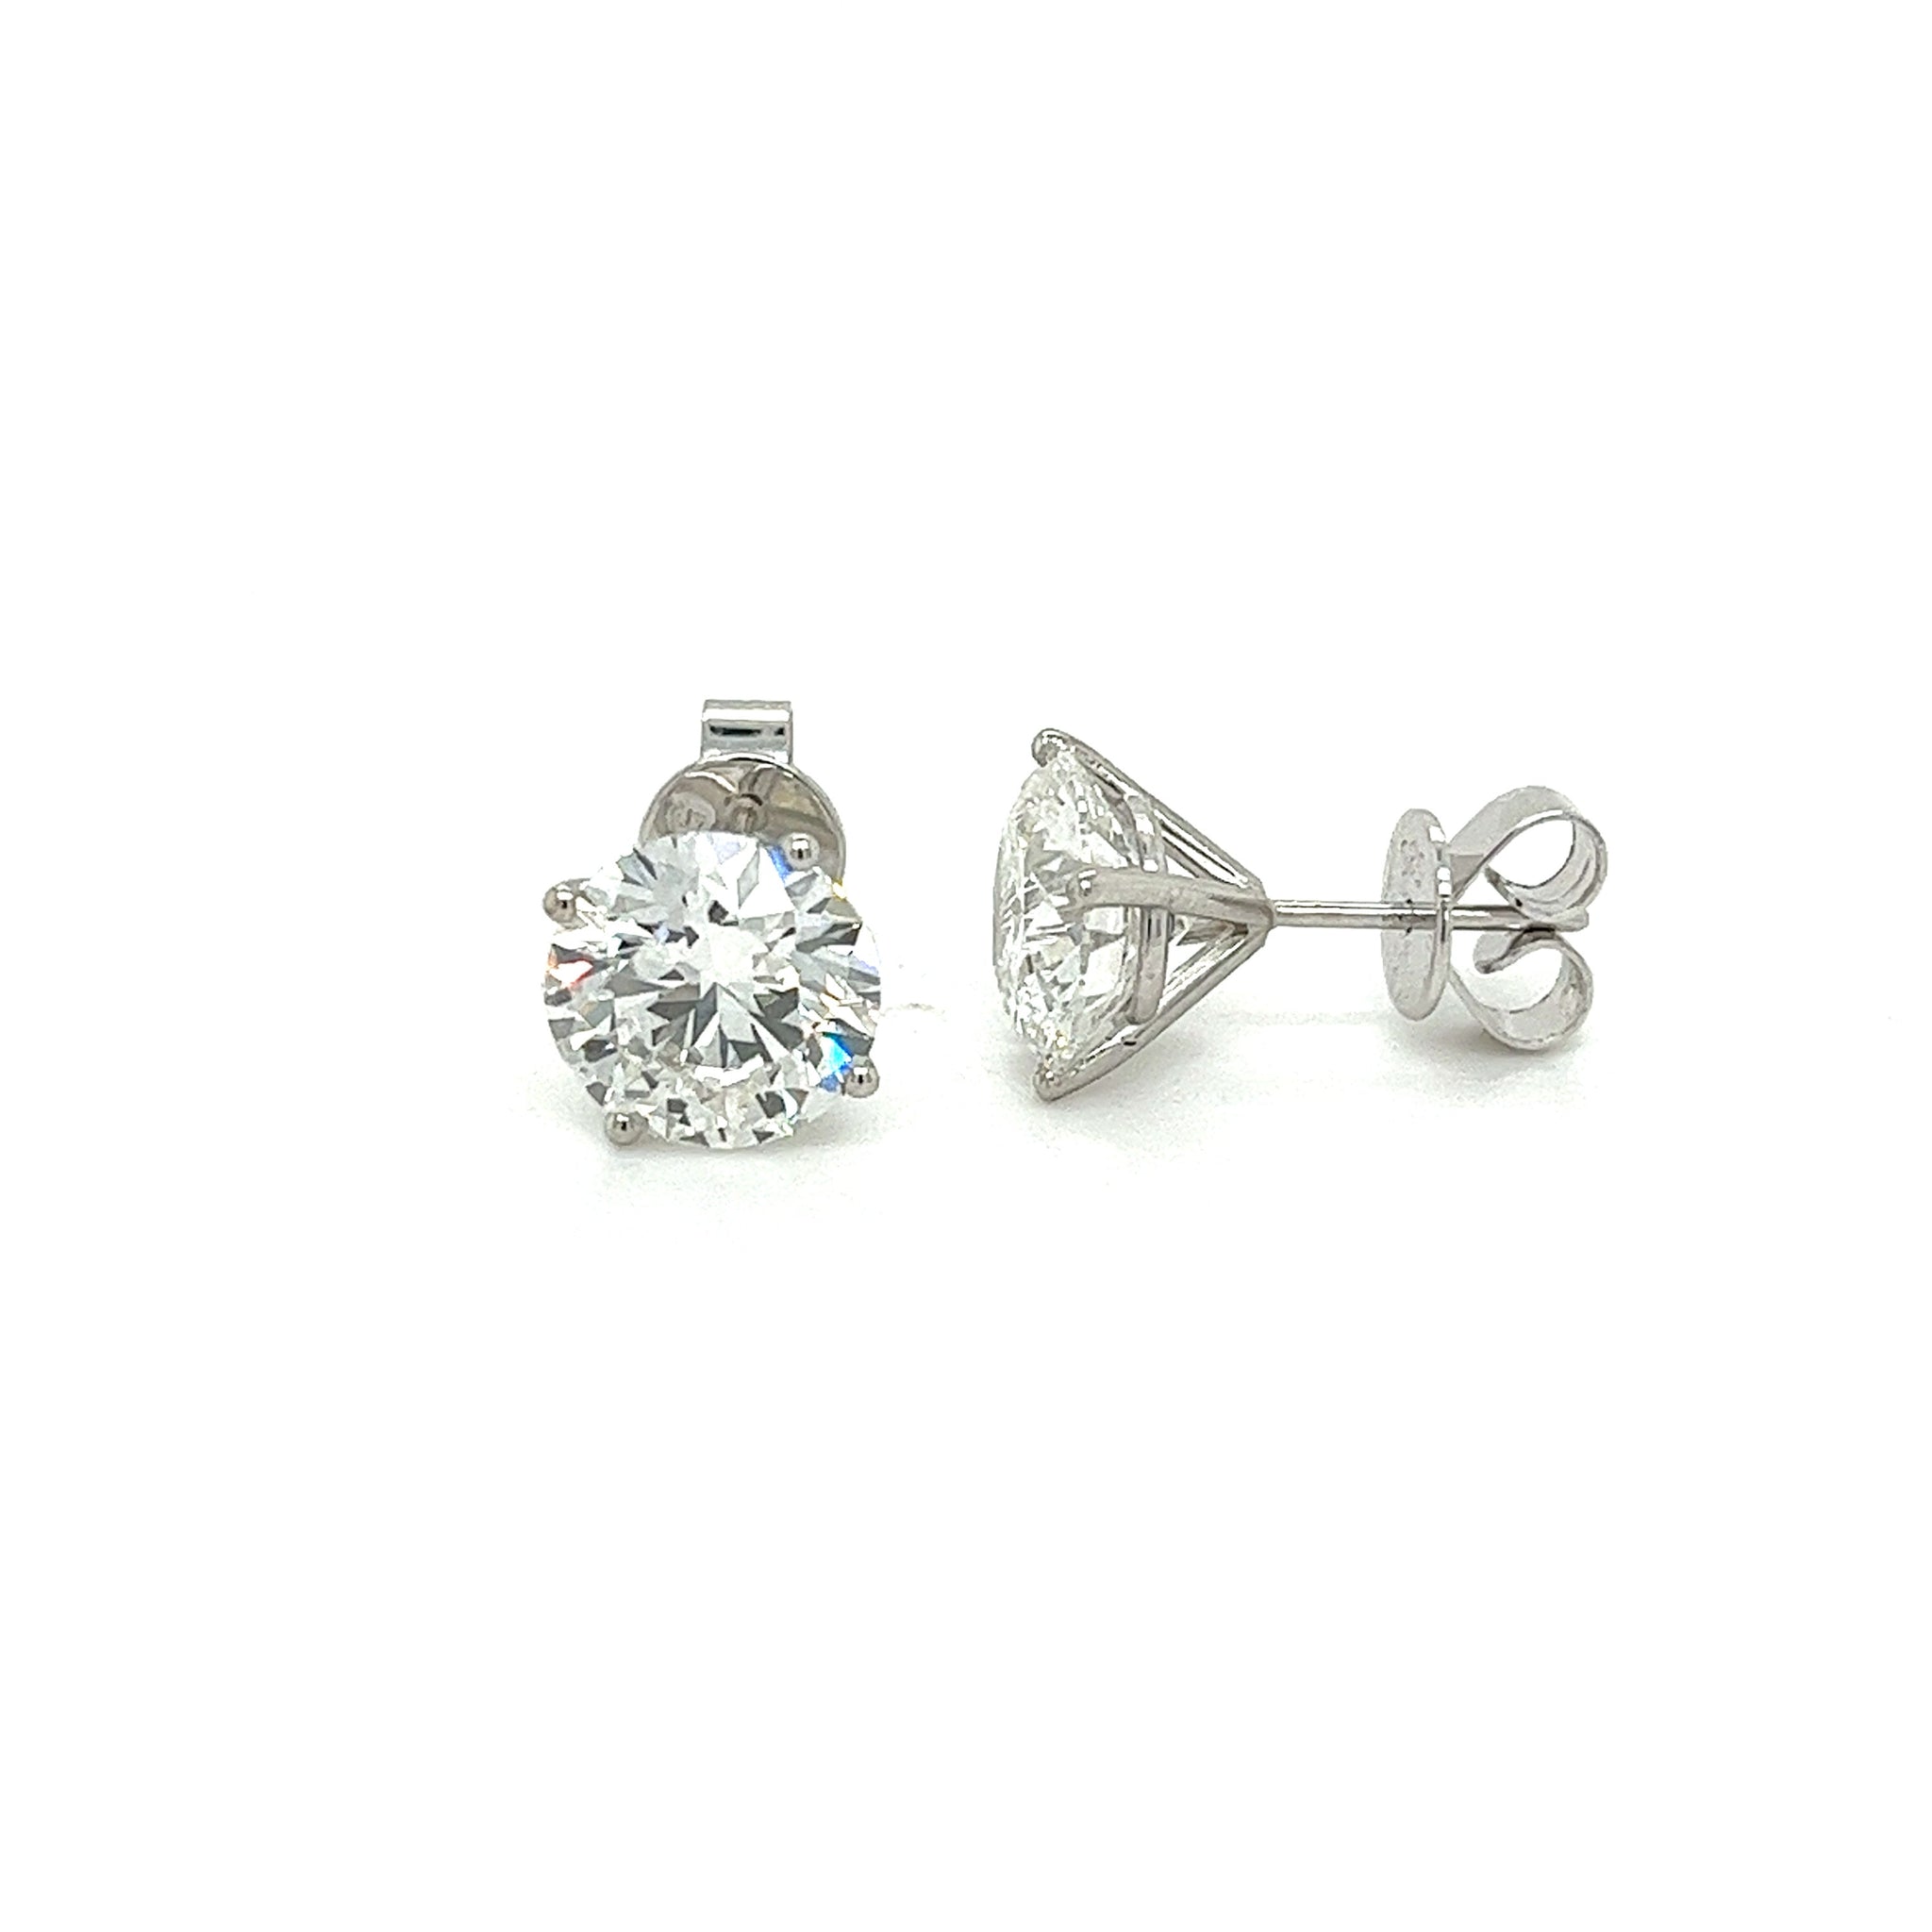 3.51 CTTW Round Lab Grown Diamond Stud Earrings in 4-Prong Martini Setting